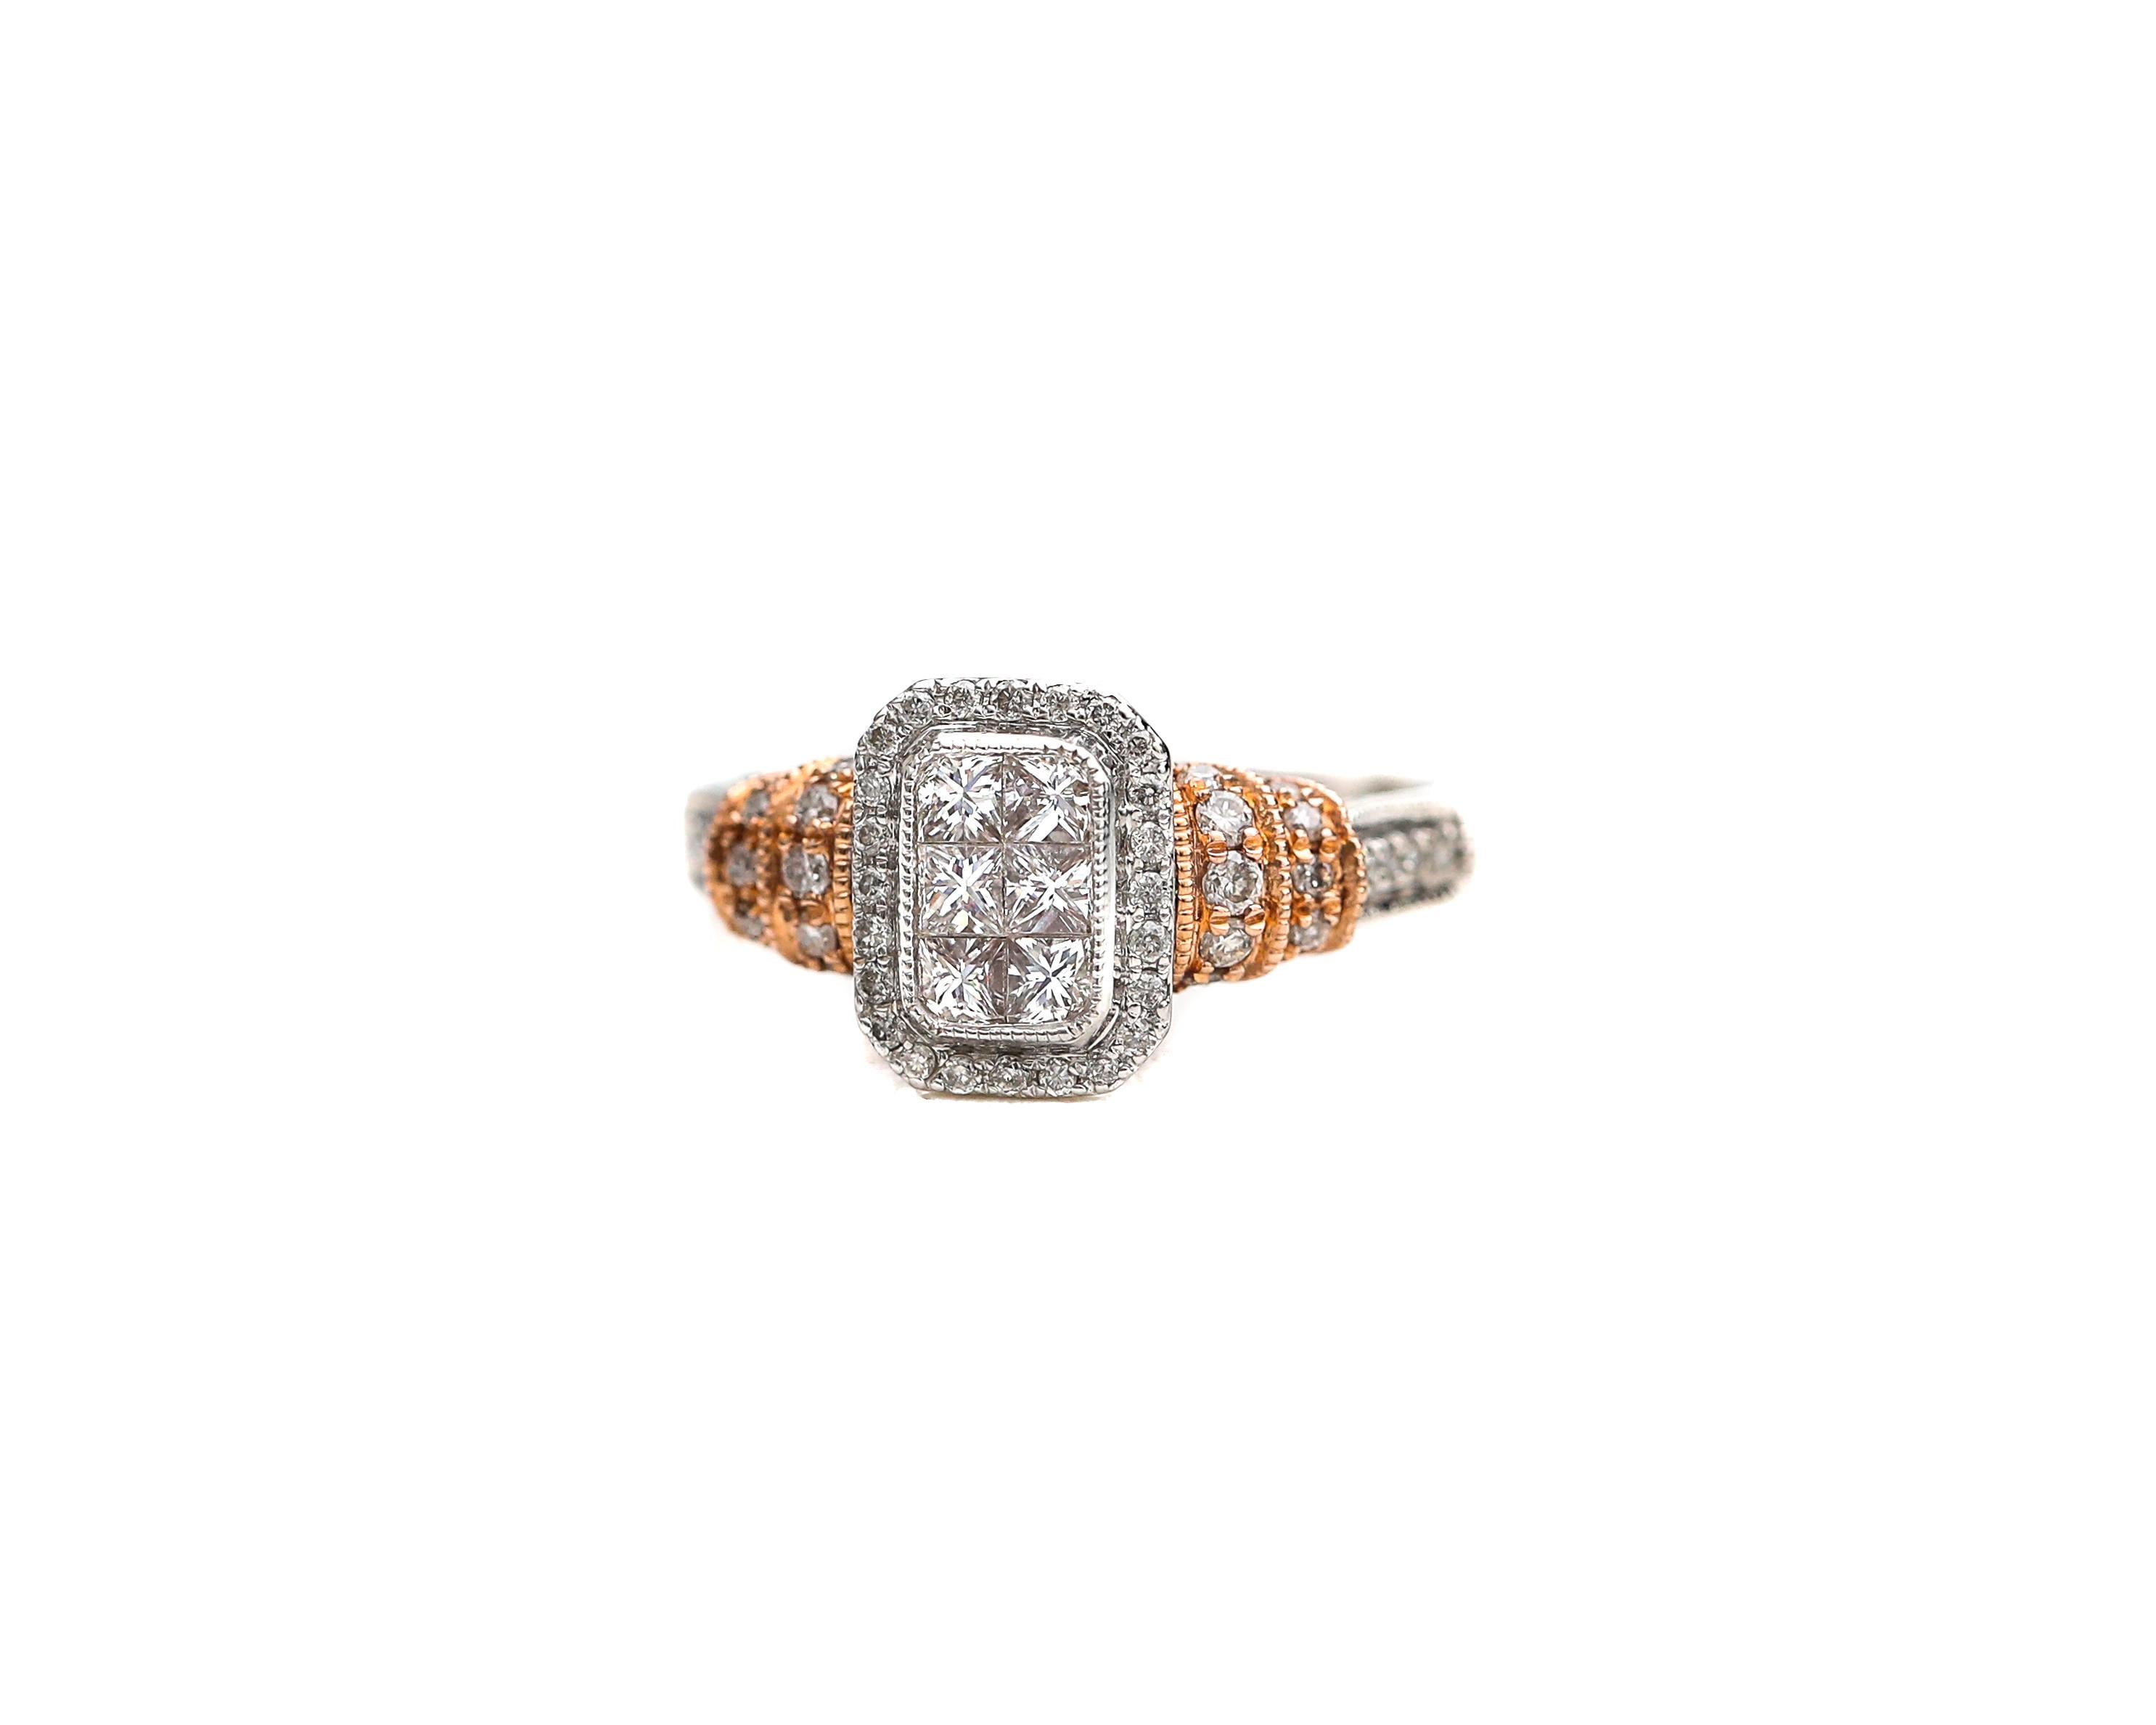 14 Karat White Gold Rose Gold Two Tone Ring from the 2000s
Featuring 1 Carats of Diamonds, G Color, VS1 Clarity 
Modern Design made by Designer Michael Beaudry 

Ring Details:
Metal: 14 Karat Gold (Rose and White)
Weight: 4.15 grams
Size: 6 (can be